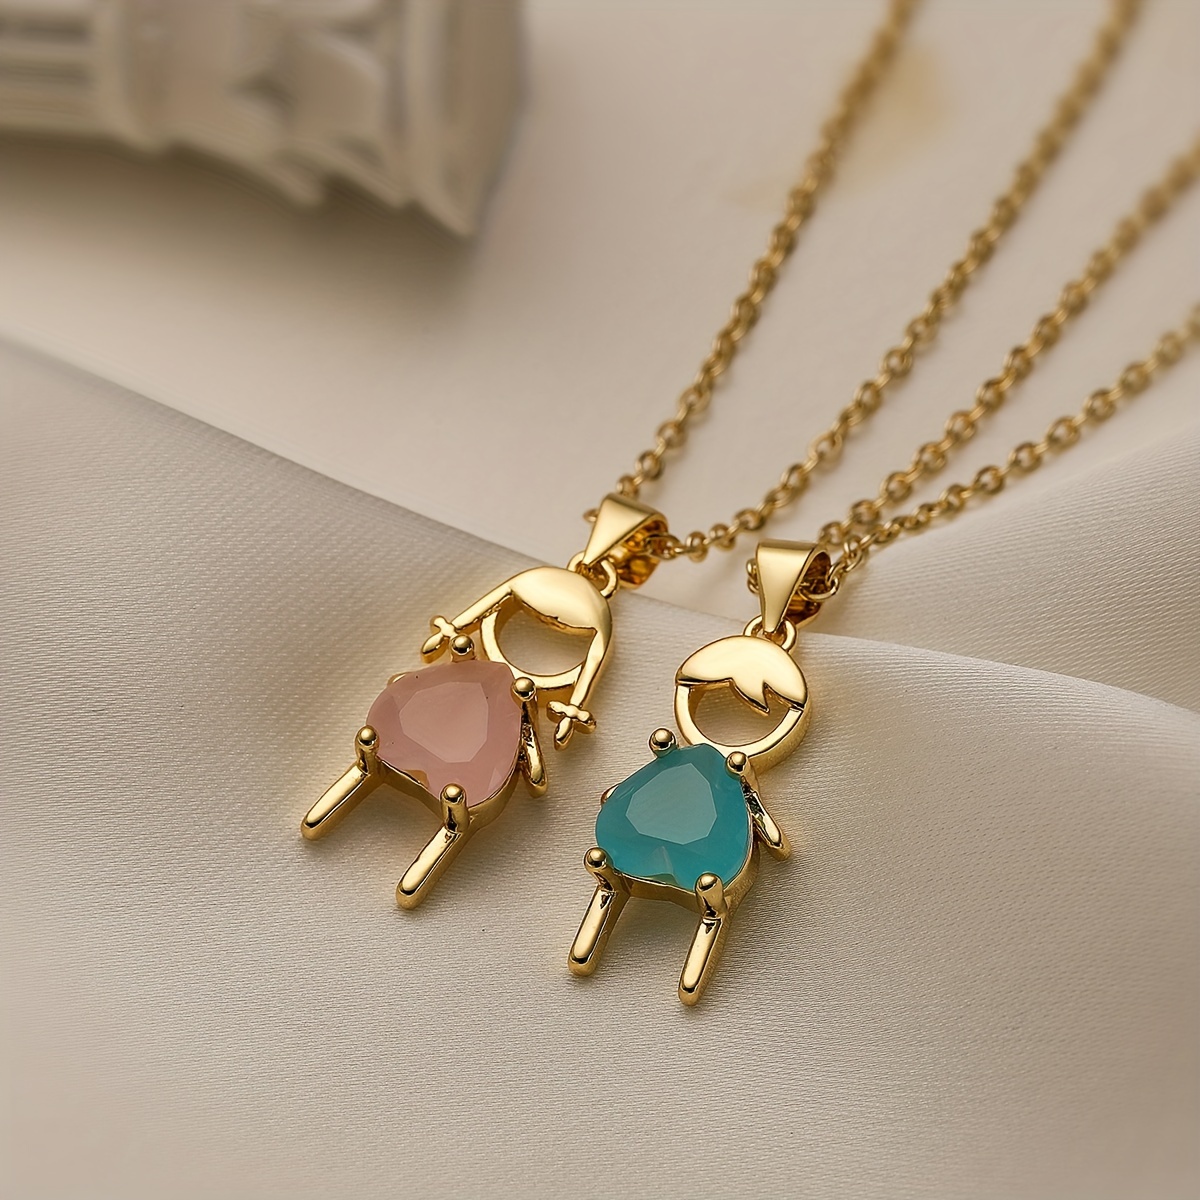 

Copper Gold-plated Boy & Girl Pendant Necklace With Synthetic Gemstone - Cute Vacation Style Jewelry - Daily & Party Wear - Unisex Clavicle Chain For All Seasons